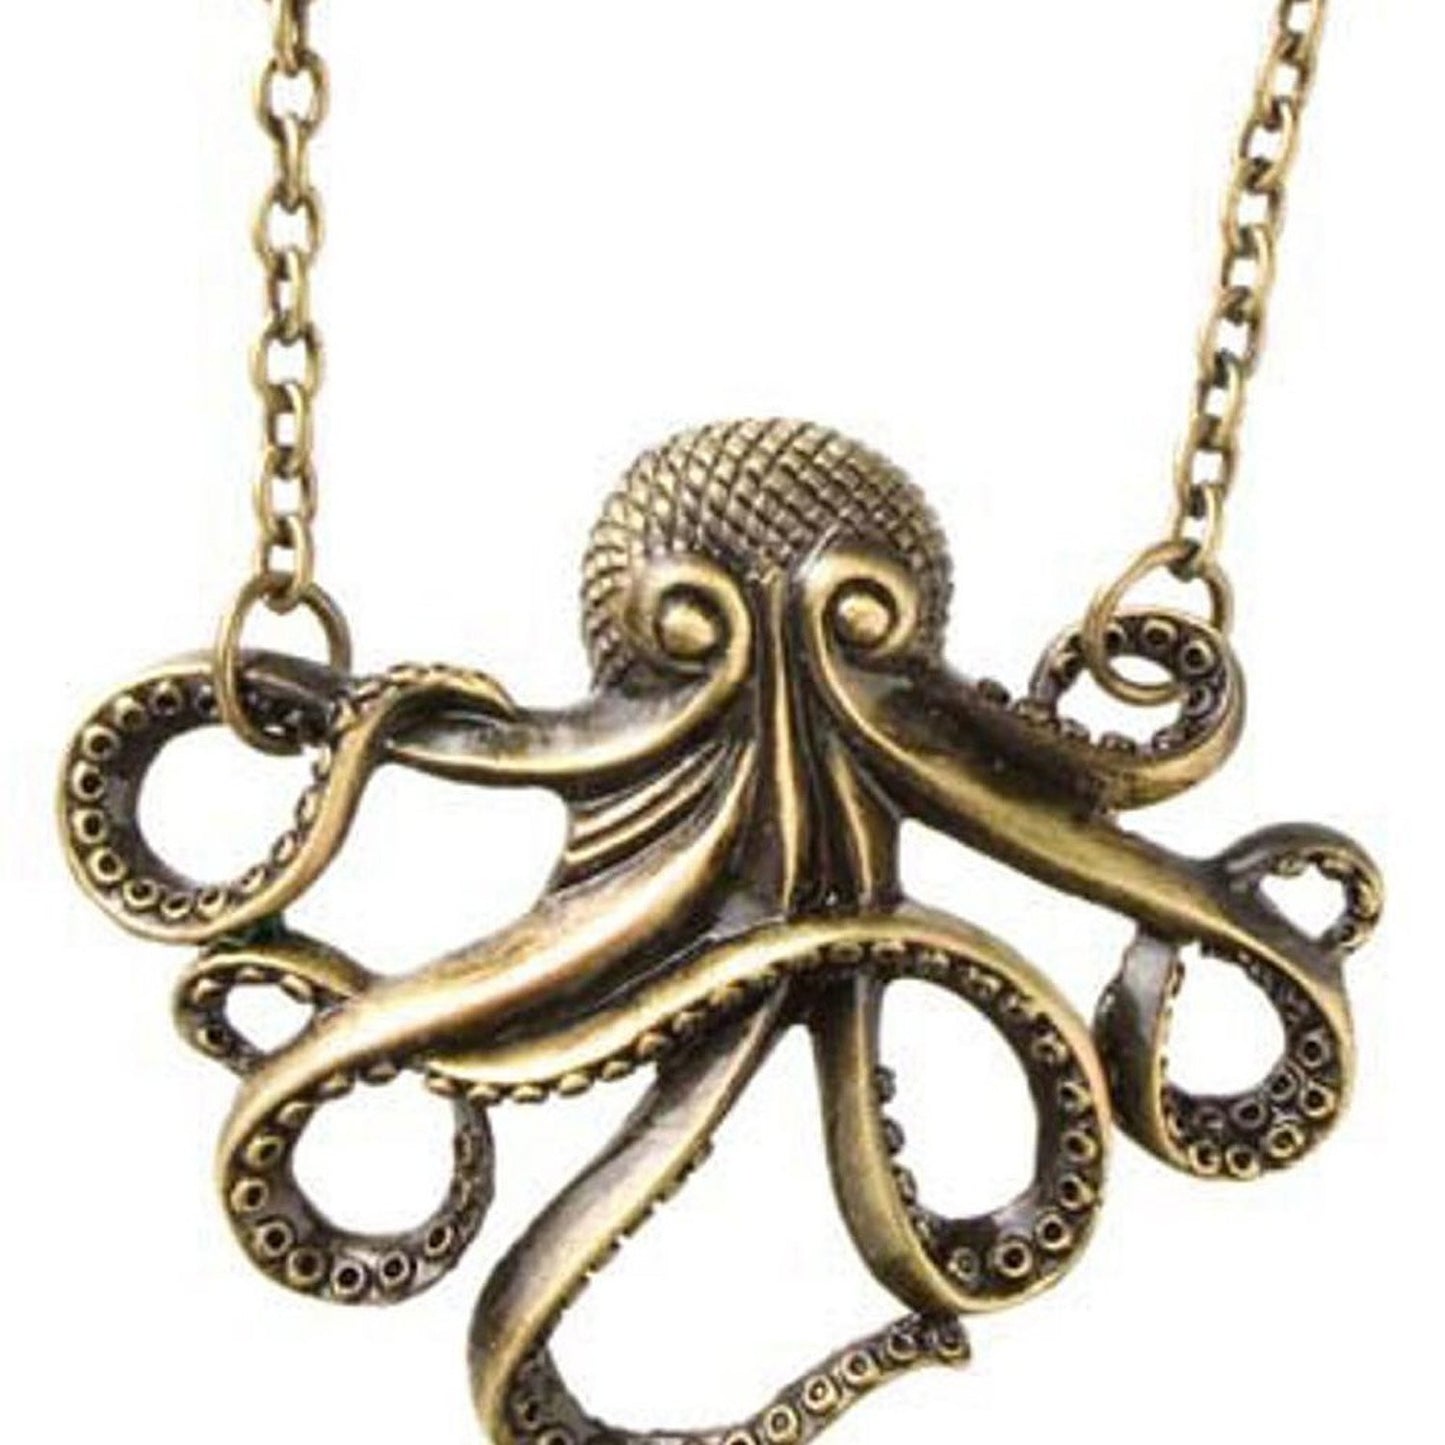 Octopus Necklace - OddGifts.com